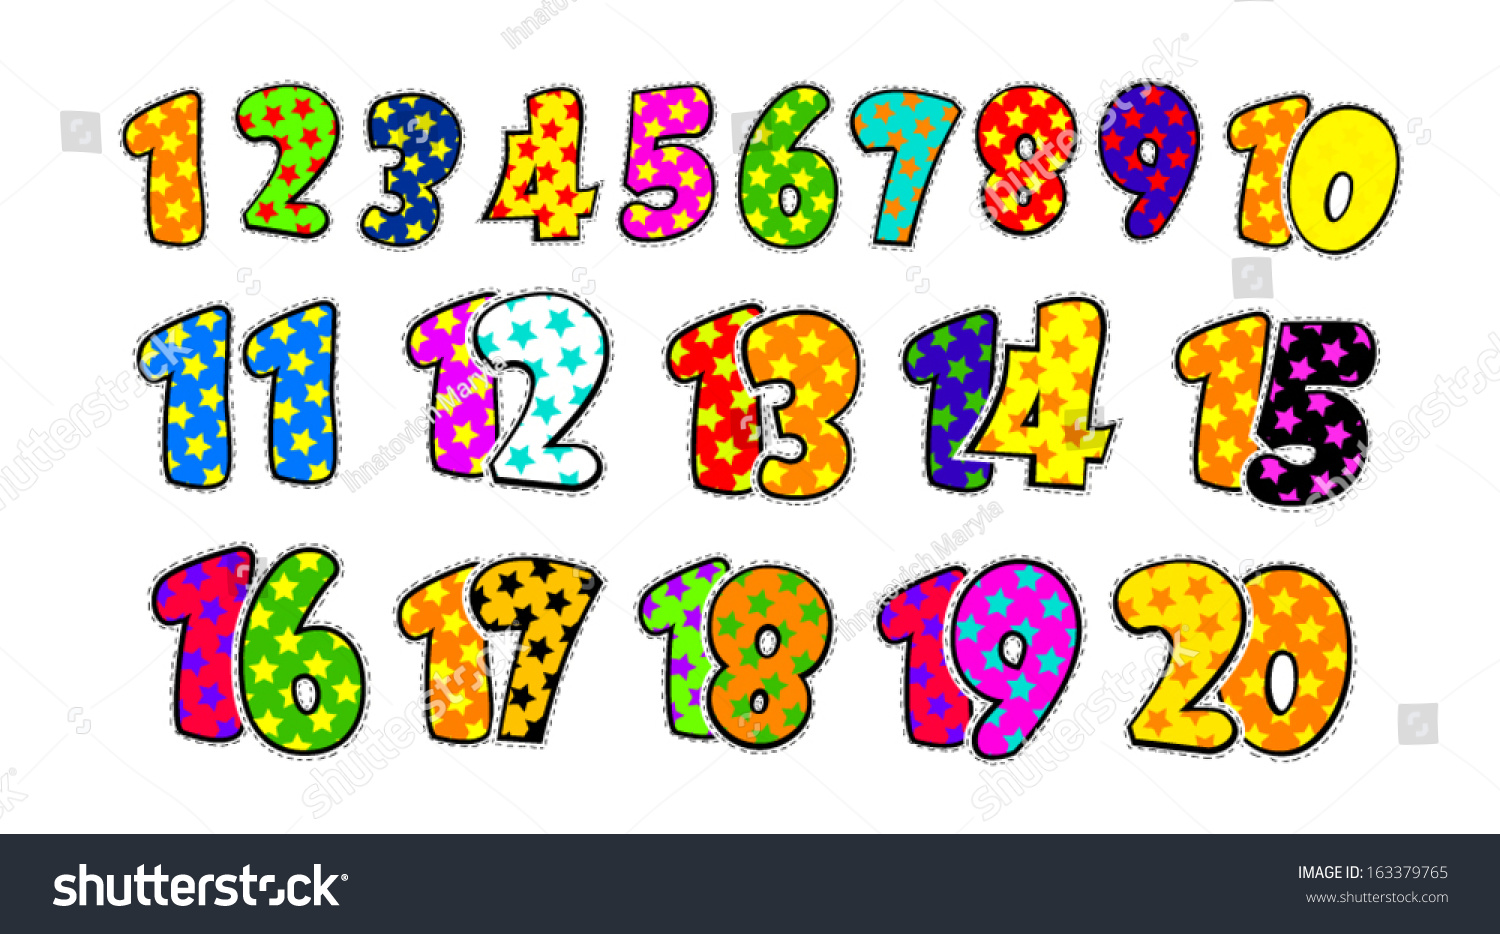 free clip art numbers 1 to 20 - photo #37